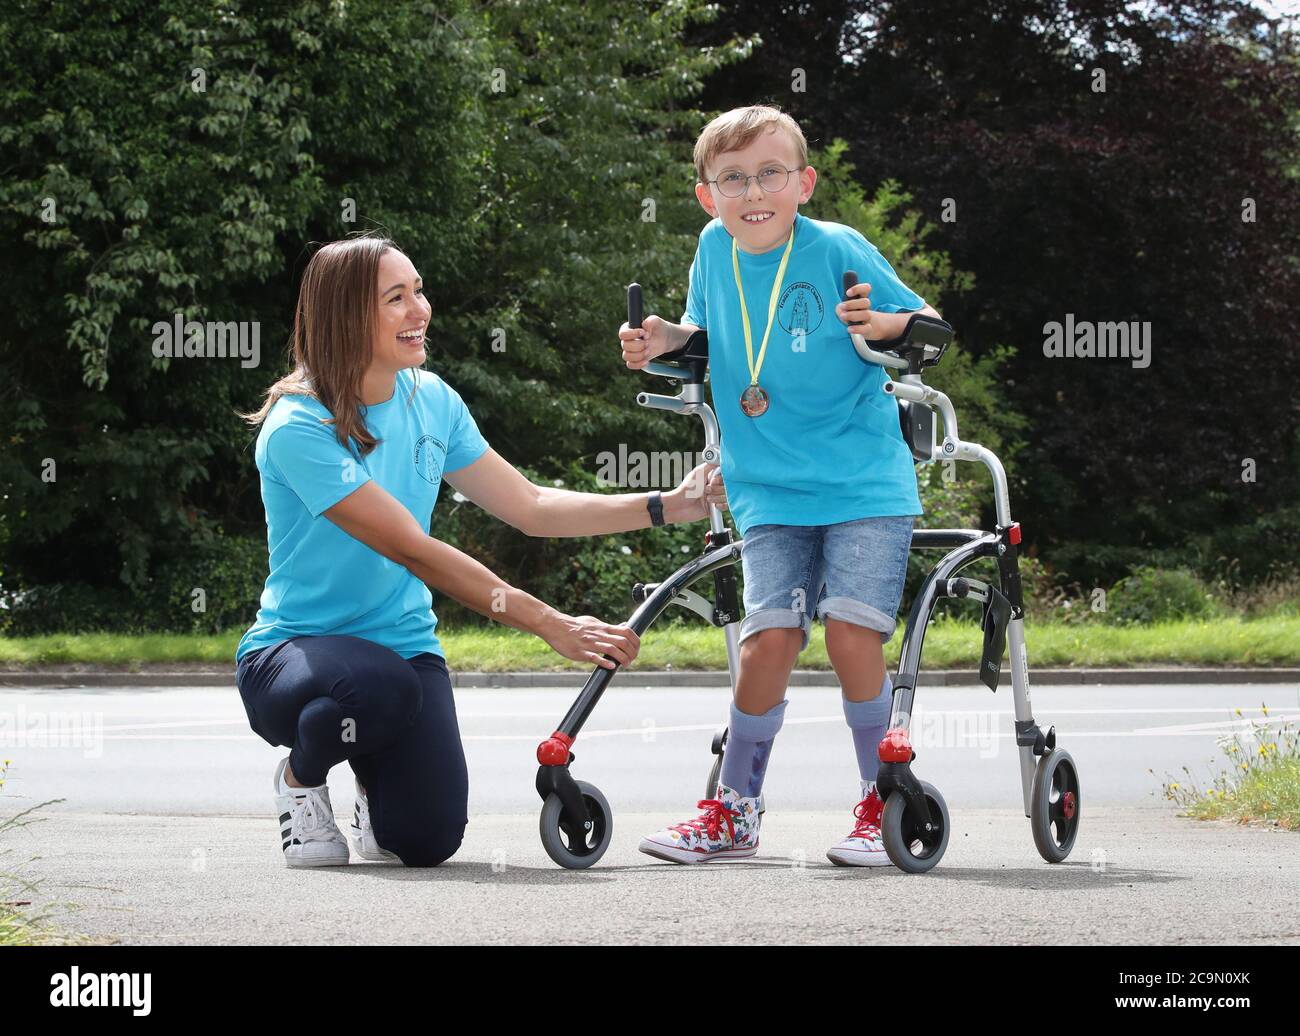 Tobias Weller, who has cerebral palsy and autism, alongside Olympic athlete Jessica Ennis-Hill (left), has completed his new challenge to run a marathon in a street near his home in Sheffield, using a race runner. Tobias, who cannot stand or walk unaided, was inspired by Captain Tom Moore to complete his first marathon on his daily walks back in April. Stock Photo